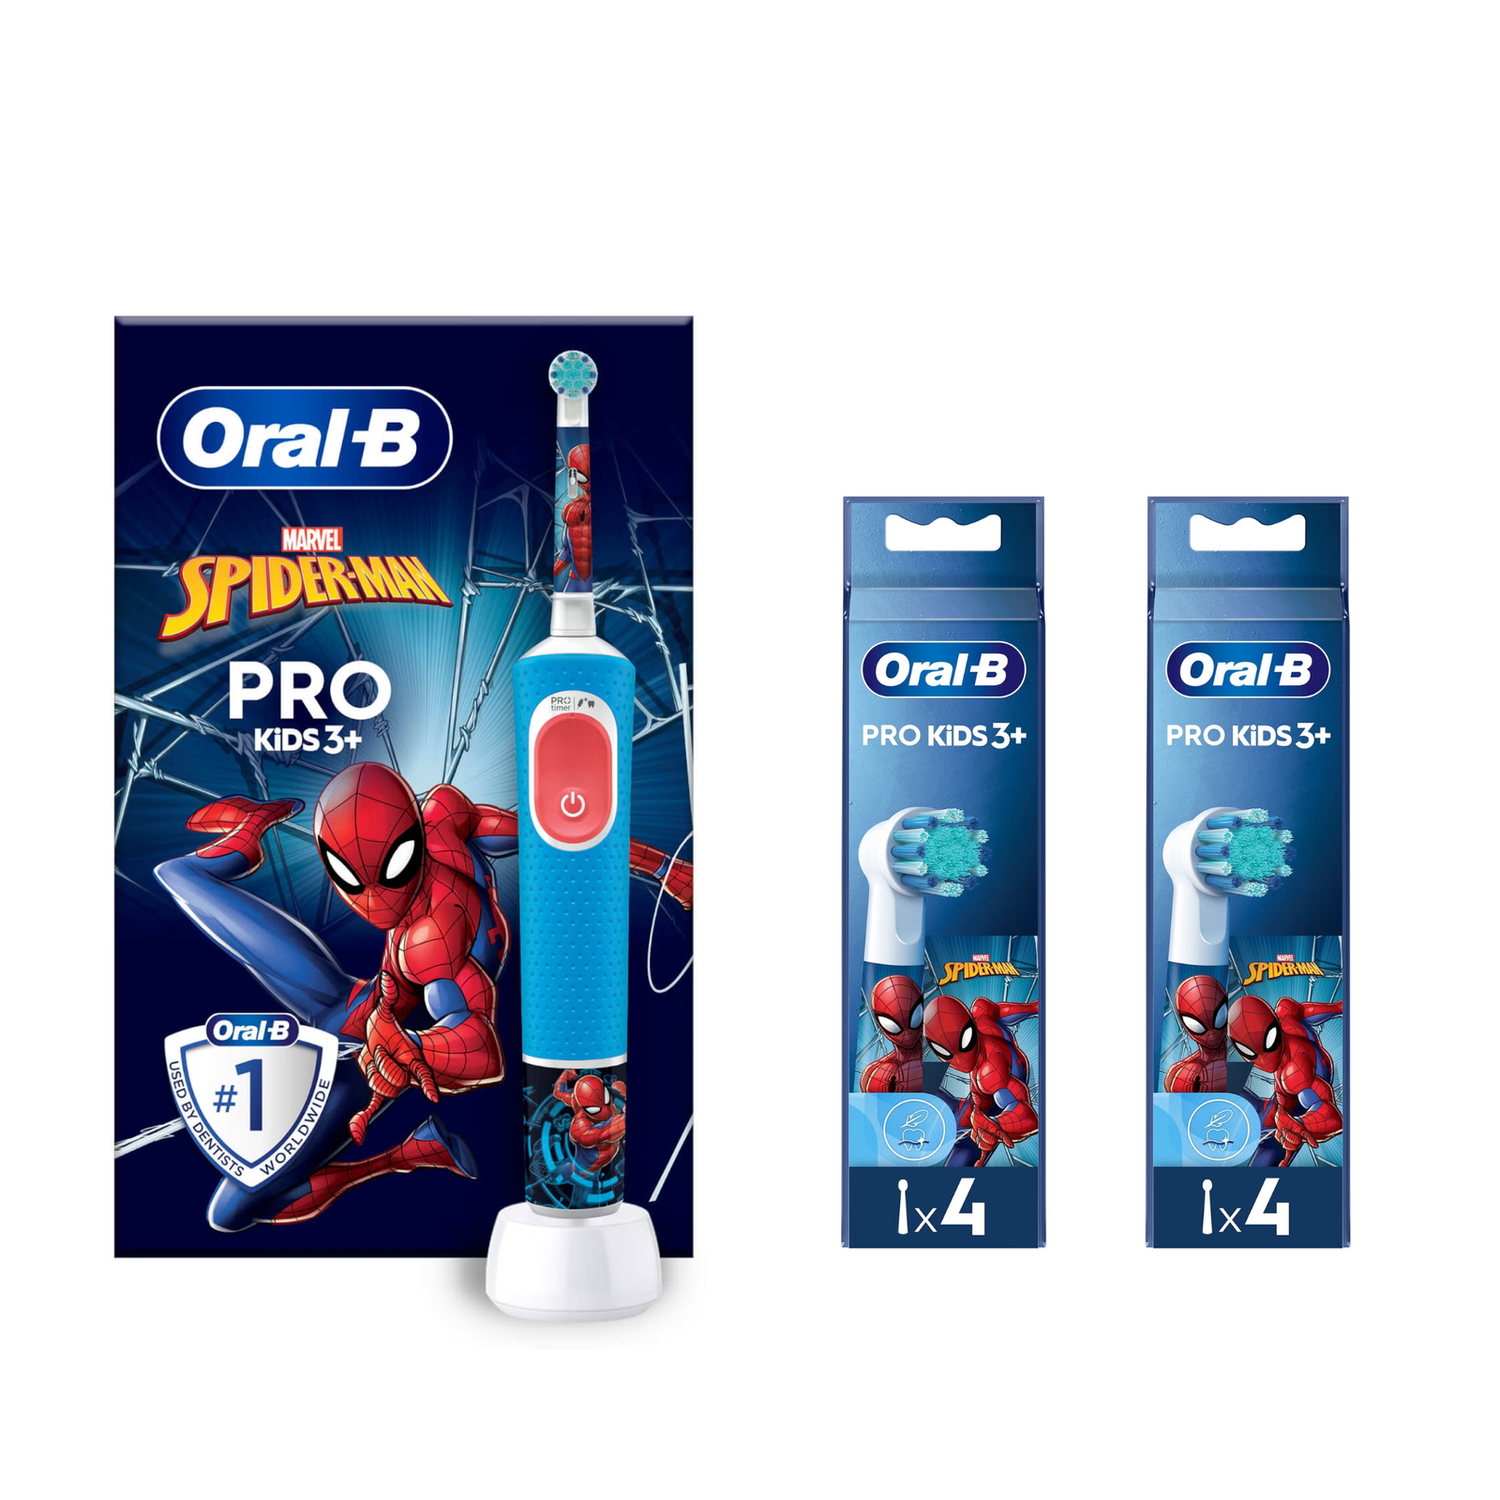 Oral-B Pro Kids Spiderman Electric Toothbrush - Blue/Red